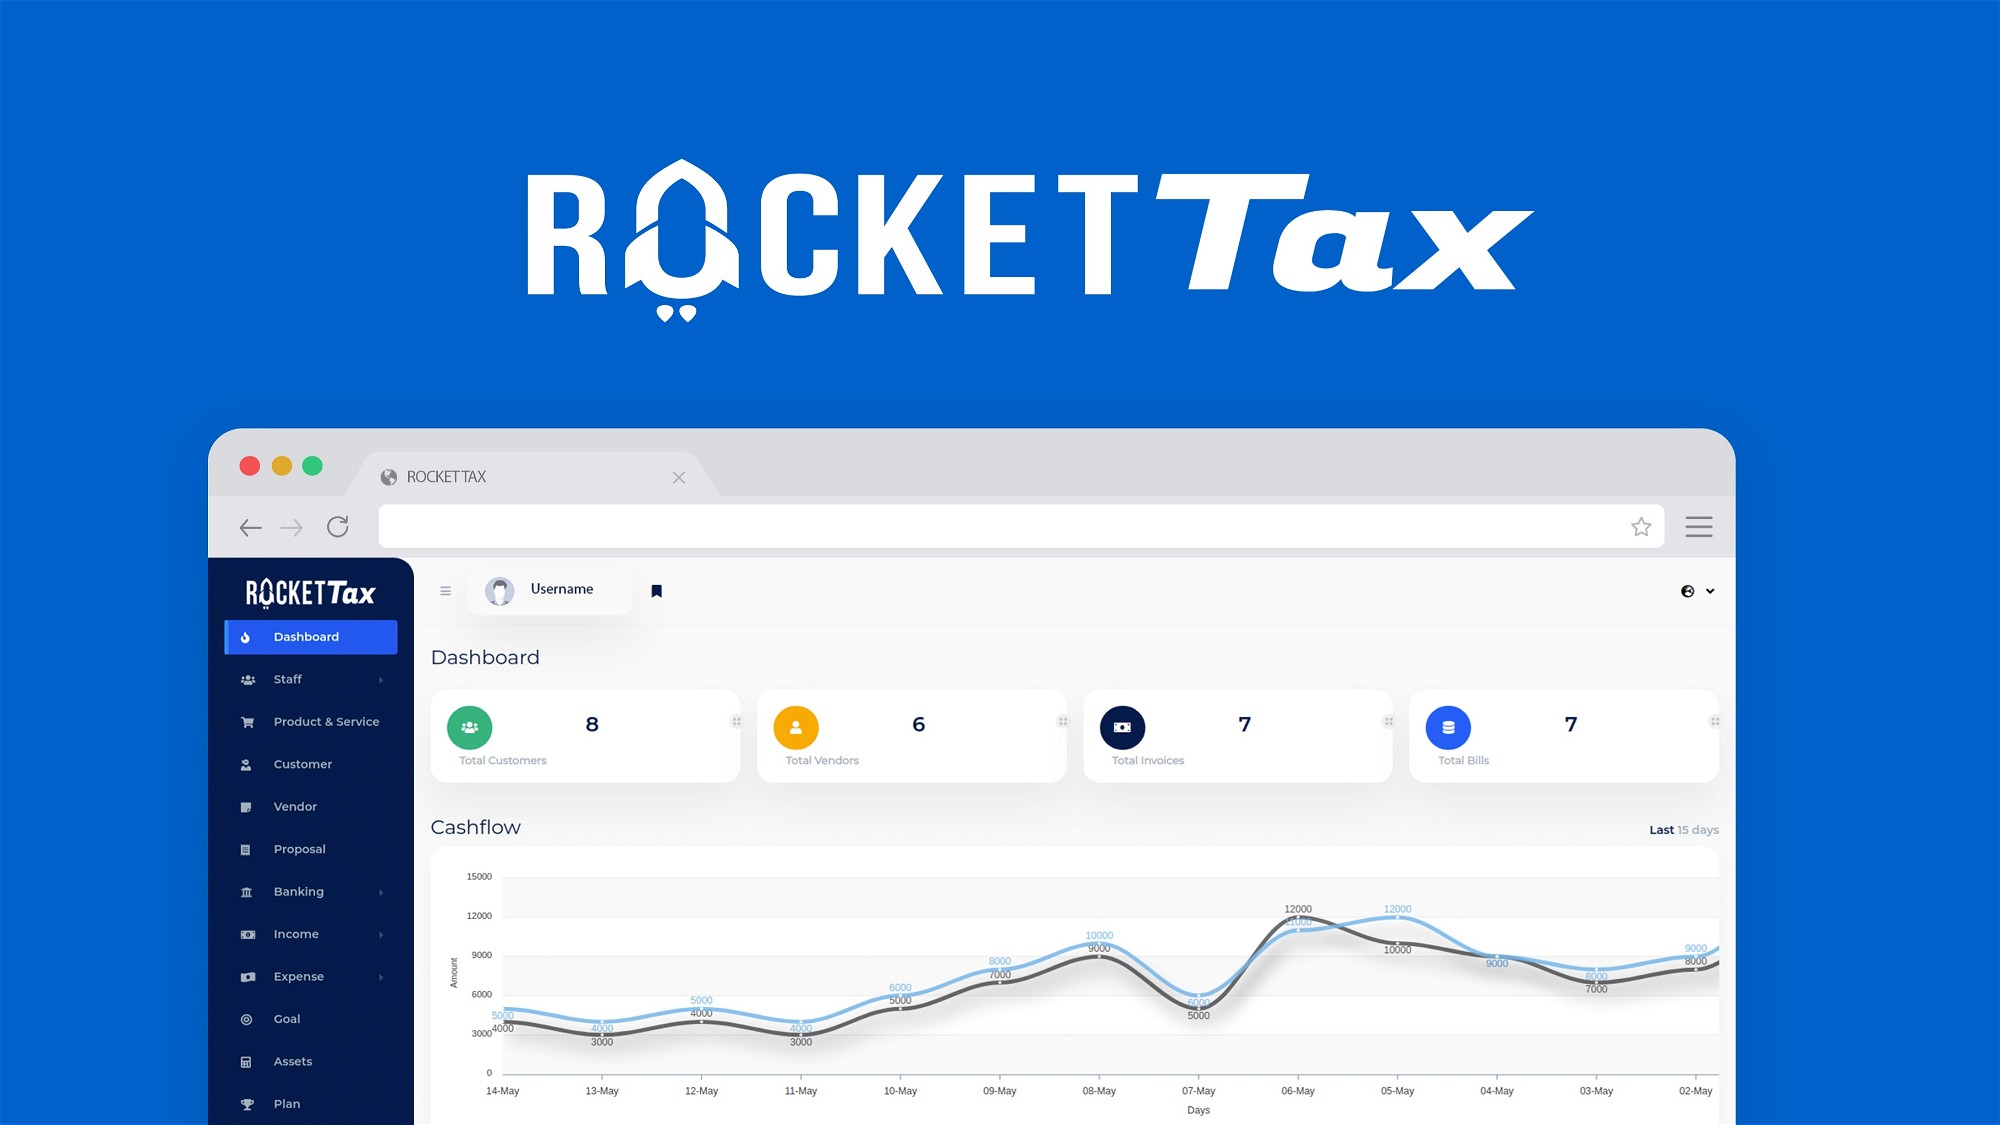 See all your finances in one place with Rocket TAX